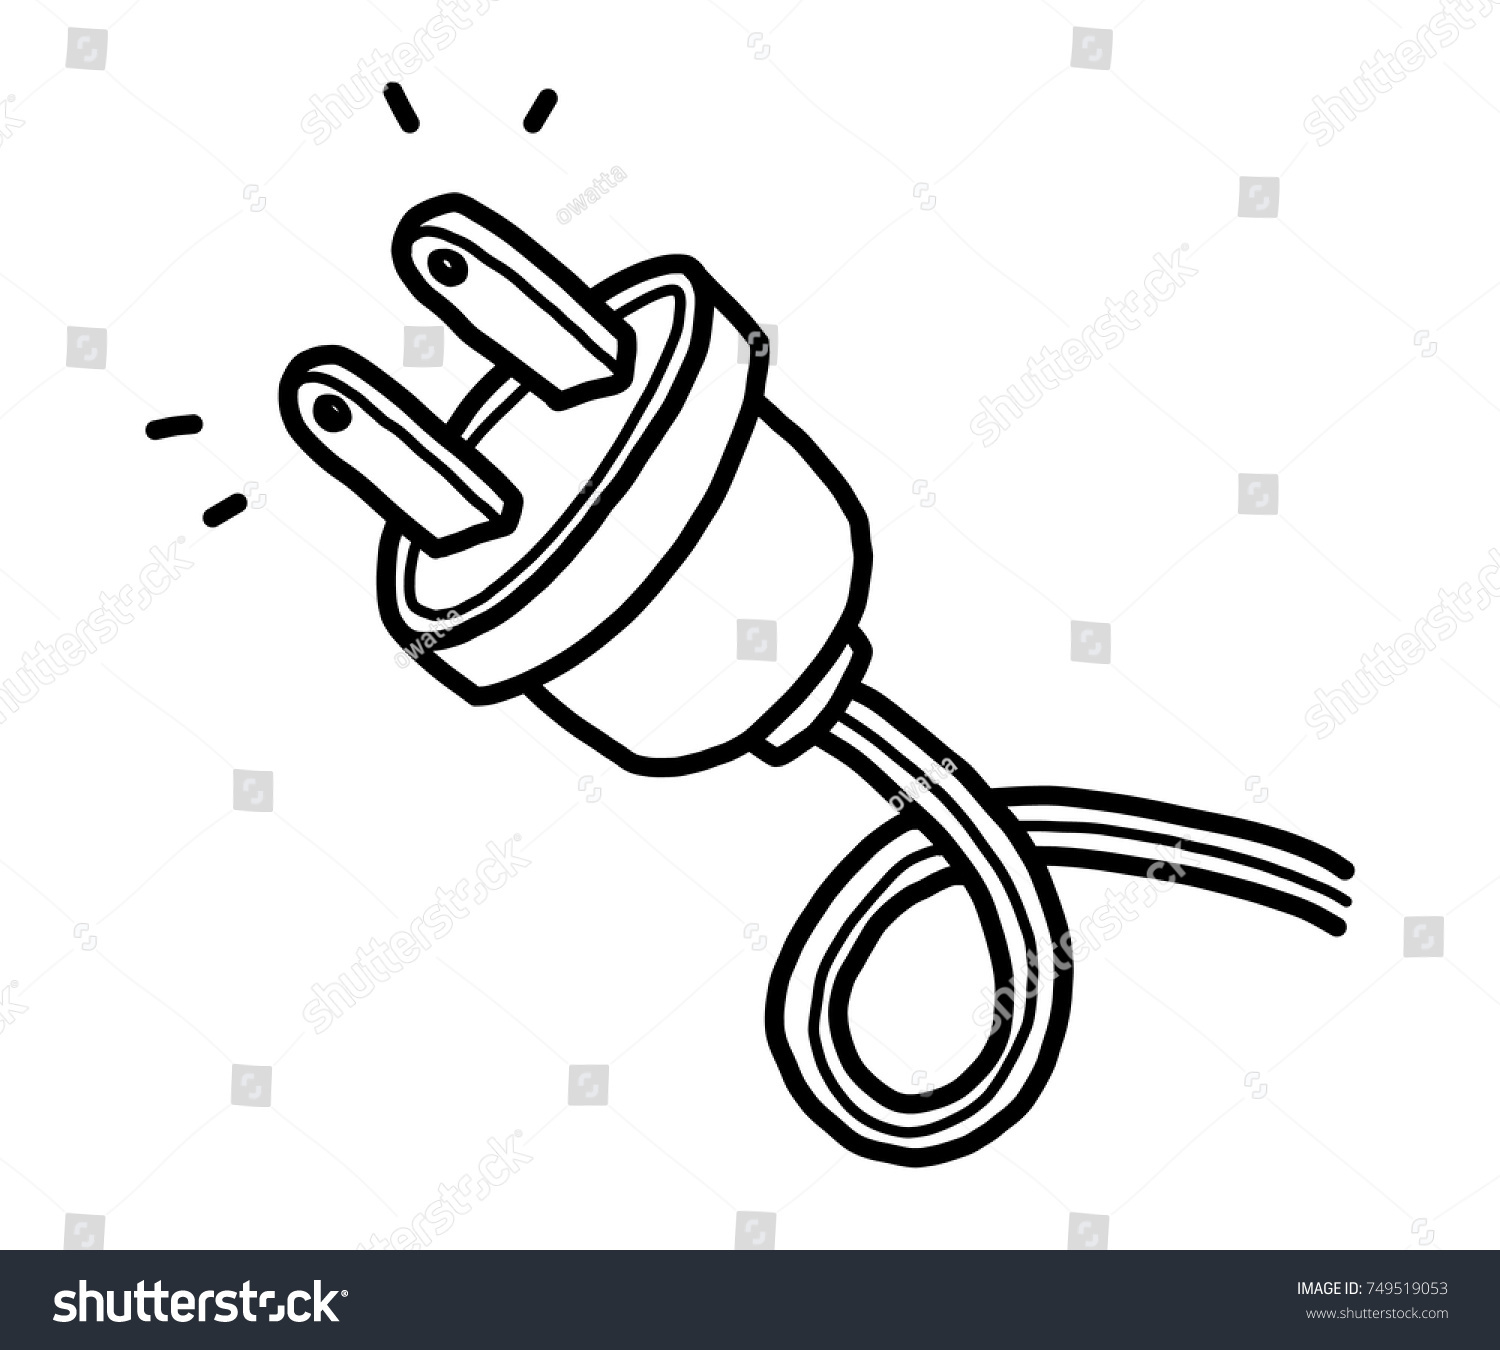 plug clipart black and white